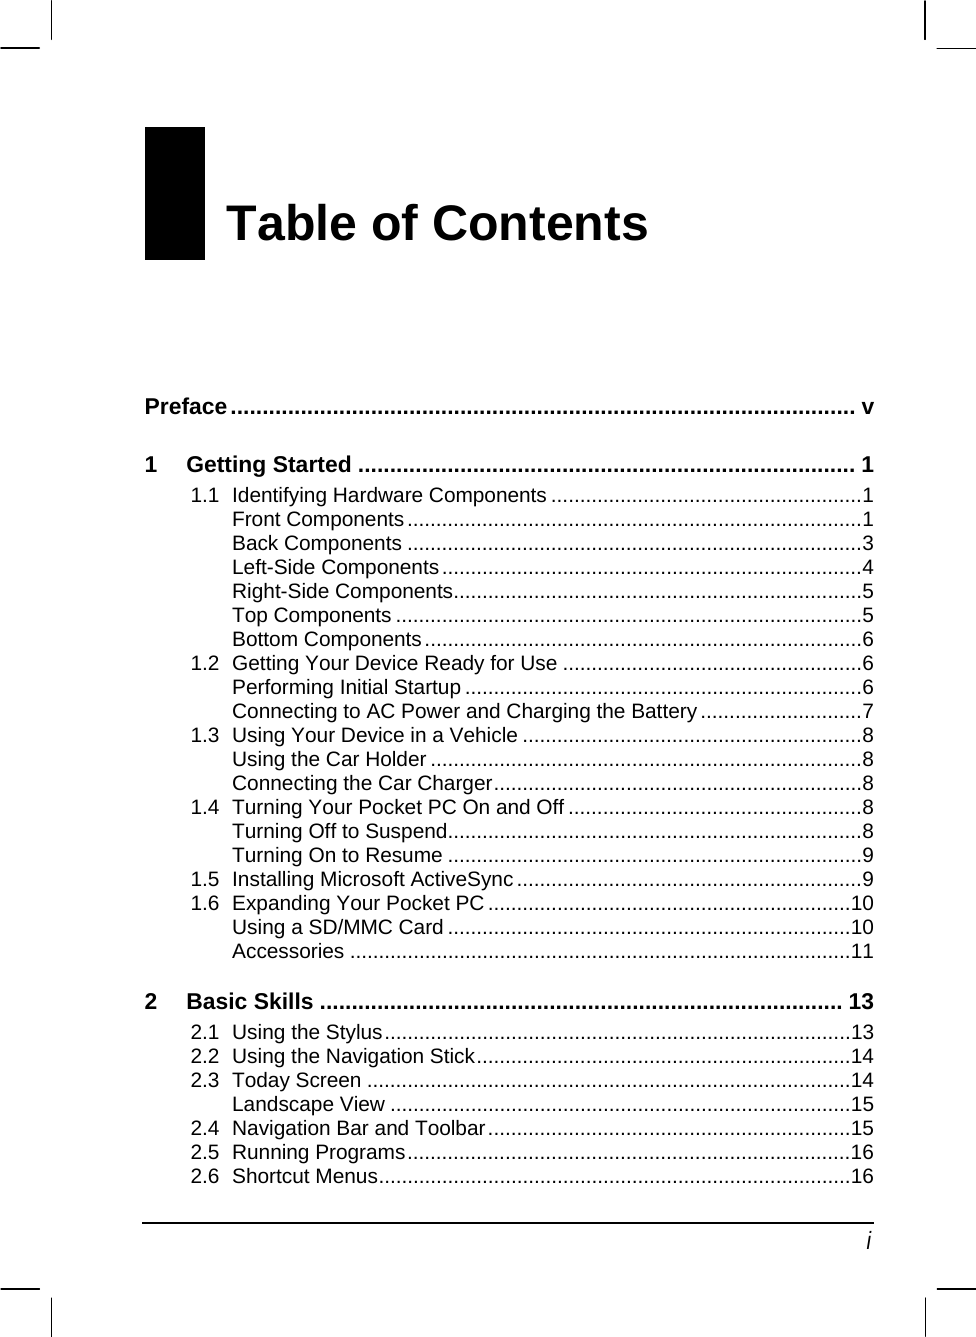   i Table of Contents Preface.................................................................................................. v 1 Getting Started .............................................................................. 1 1.1 Identifying Hardware Components ......................................................1 Front Components...............................................................................1 Back Components ...............................................................................3 Left-Side Components.........................................................................4 Right-Side Components.......................................................................5 Top Components .................................................................................5 Bottom Components............................................................................6 1.2 Getting Your Device Ready for Use ....................................................6 Performing Initial Startup .....................................................................6 Connecting to AC Power and Charging the Battery............................7 1.3 Using Your Device in a Vehicle ...........................................................8 Using the Car Holder ...........................................................................8 Connecting the Car Charger................................................................8 1.4 Turning Your Pocket PC On and Off ...................................................8 Turning Off to Suspend........................................................................8 Turning On to Resume ........................................................................9 1.5 Installing Microsoft ActiveSync ............................................................9 1.6 Expanding Your Pocket PC ...............................................................10 Using a SD/MMC Card ......................................................................10 Accessories .......................................................................................11 2 Basic Skills .................................................................................. 13 2.1 Using the Stylus.................................................................................13 2.2 Using the Navigation Stick.................................................................14 2.3 Today Screen ....................................................................................14 Landscape View ................................................................................15 2.4 Navigation Bar and Toolbar...............................................................15 2.5 Running Programs.............................................................................16 2.6 Shortcut Menus..................................................................................16 